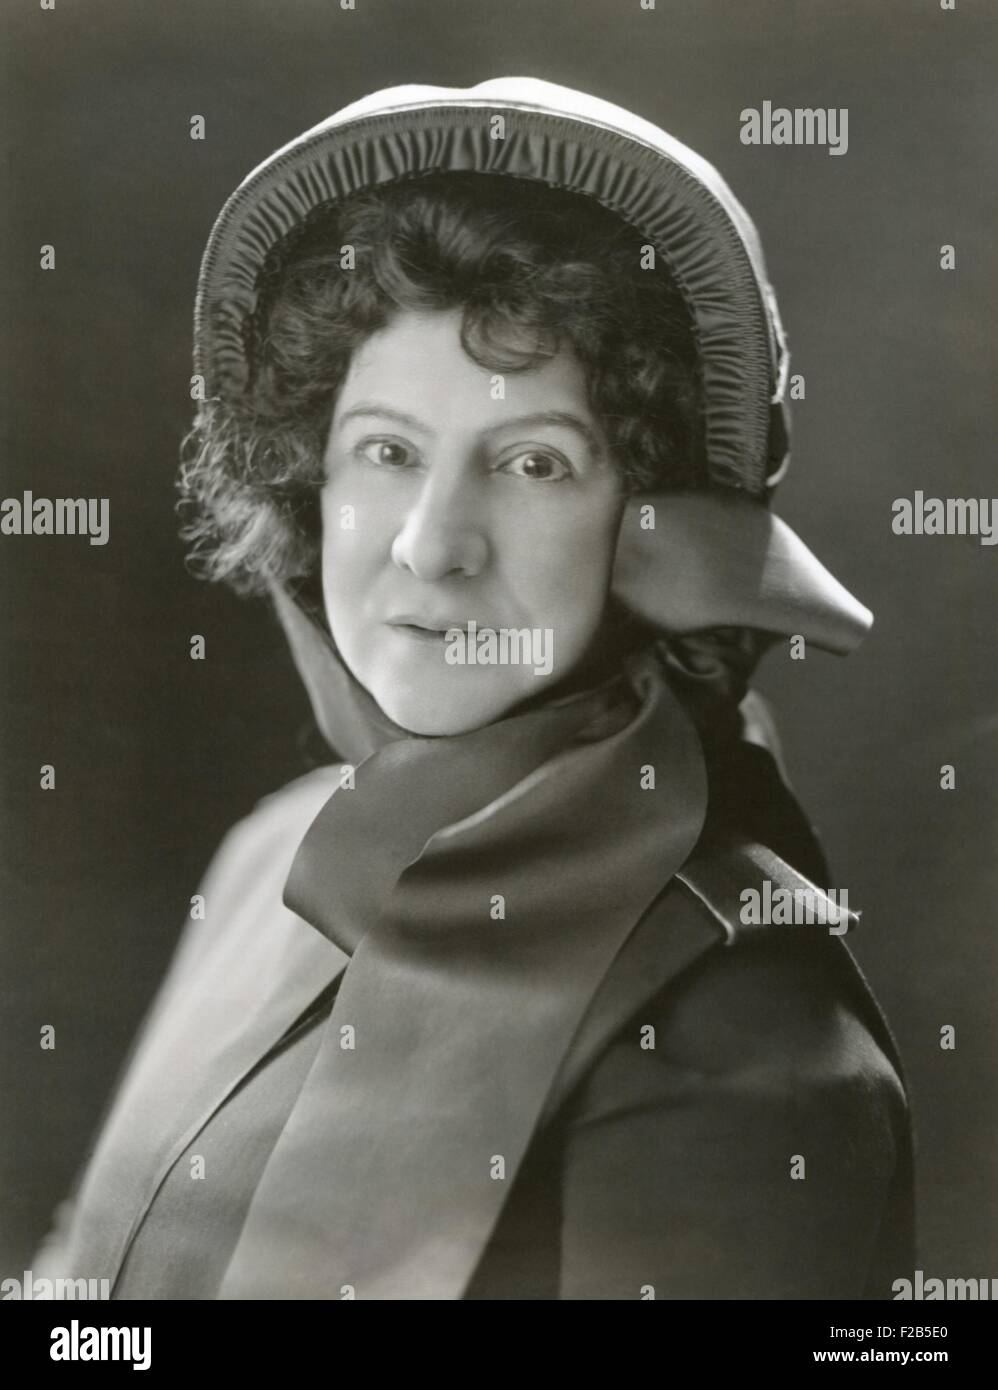 Commander Eva Booth, General of the Salvation Army from 1934 to 1939. Eva Booth was the daughter of the William Booth, who founded of the Salvation Army in the slum of 'darkest London' in 1865. - (BSLOC 2014 17 203) Stock Photo